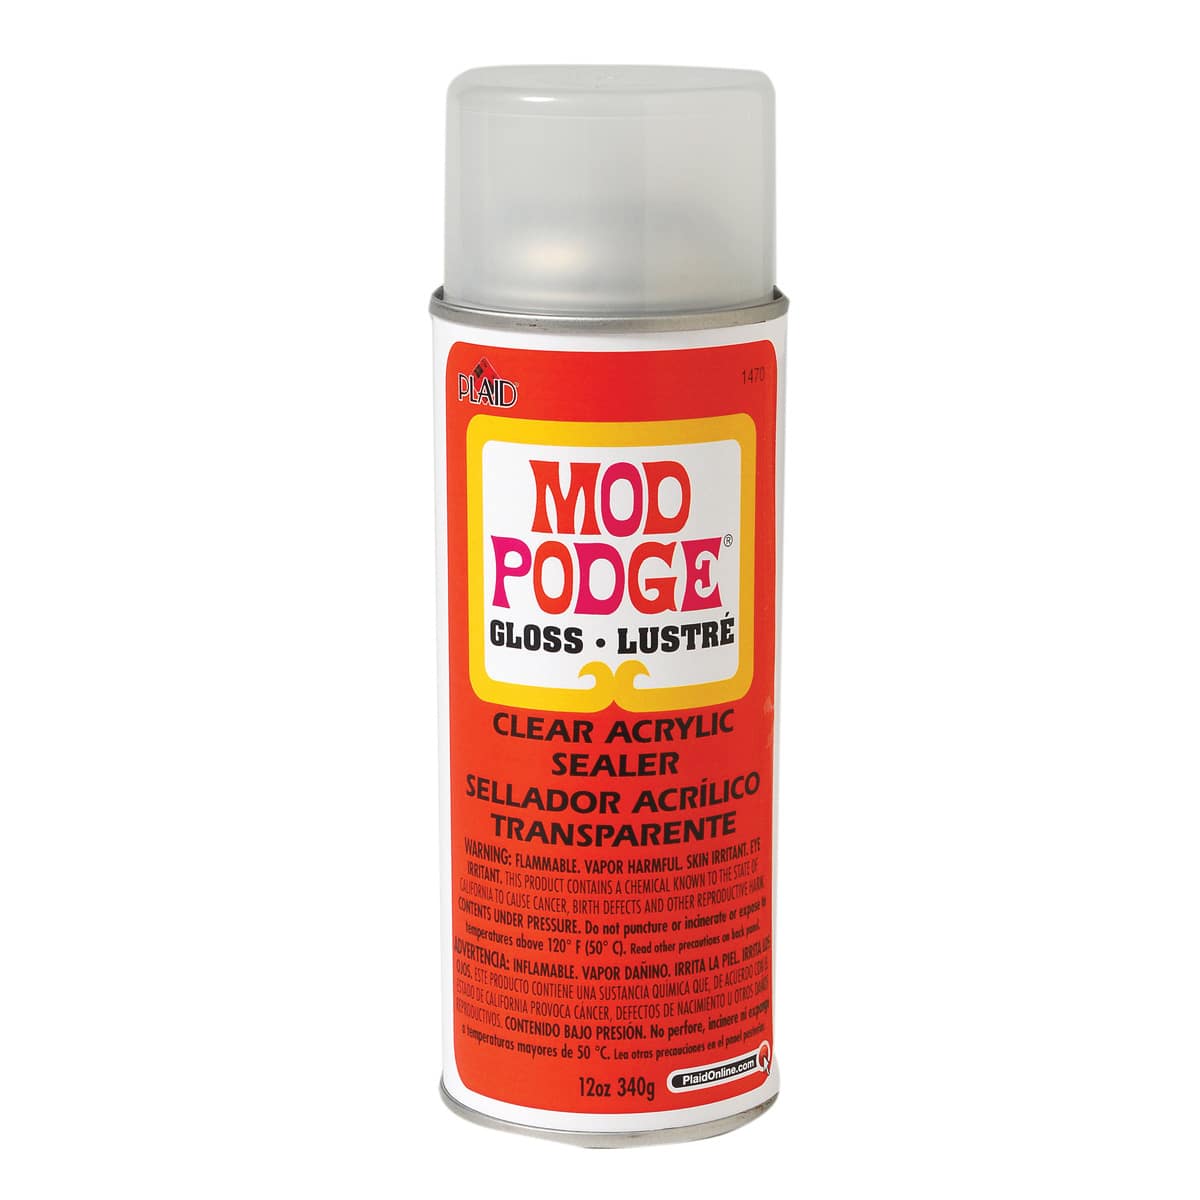 Clear Acrylic Sealer Spray for Wood, Metal, Canvas - Protects